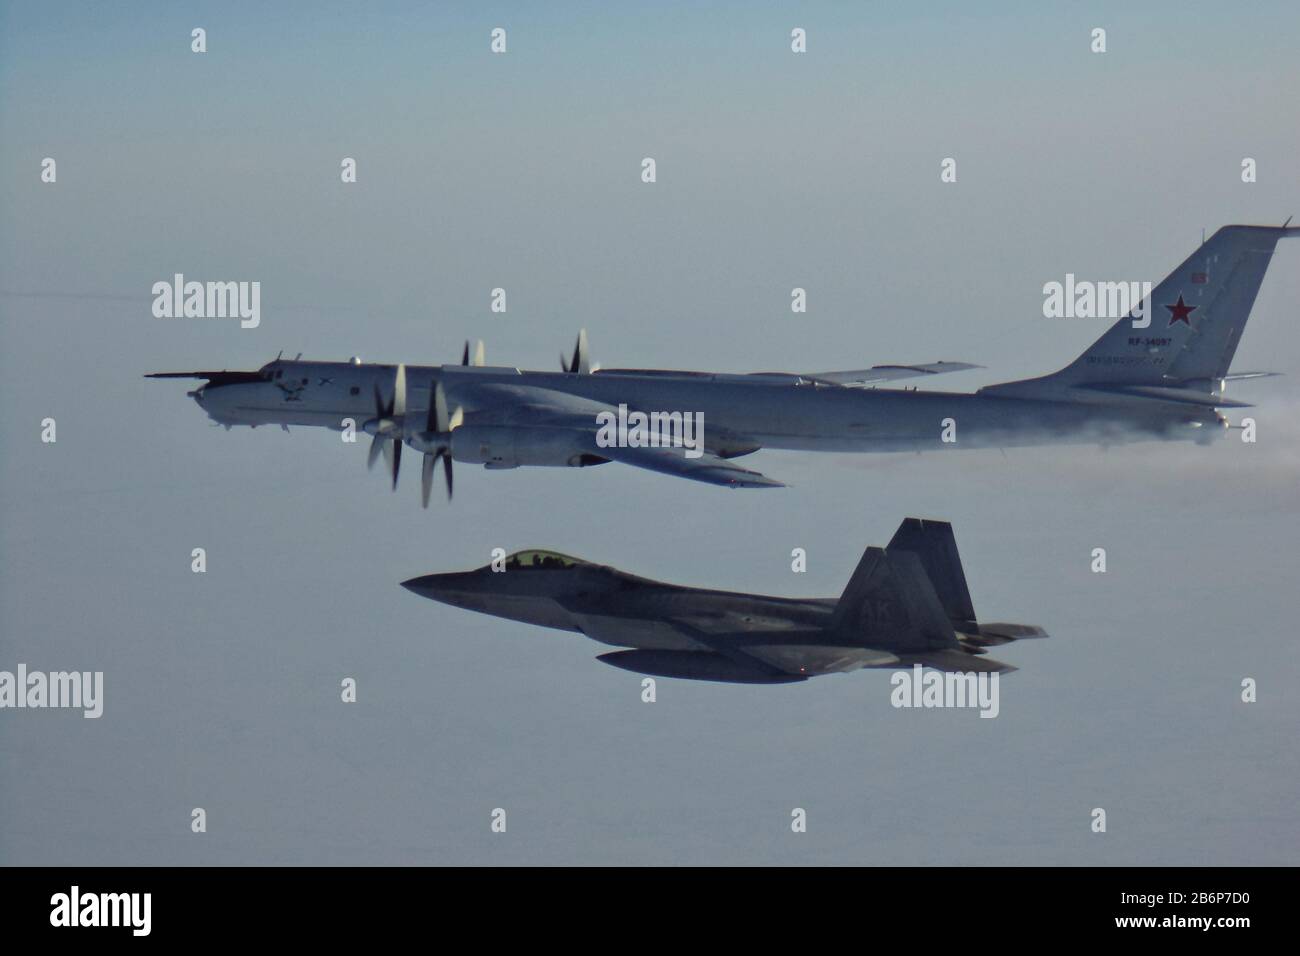 Washington DC, USA. 11th Mar, 2020. North American Aerospace Defense Command F-22s, CF-18s, supported by KC-135 Stratotanker and E-3 Sentry AWACS aircraft, intercepted two Russian Tu-142 maritime reconnaissance aircraft entering the Alaskan Air Defense Identification Zone on March 9, 2020. The Russian aircraft were loitering about 2,500 feet above a camp that was built for the U.S. submarine exercise known as ICEX. Photo by NORAD/UPI Credit: UPI/Alamy Live News Stock Photo